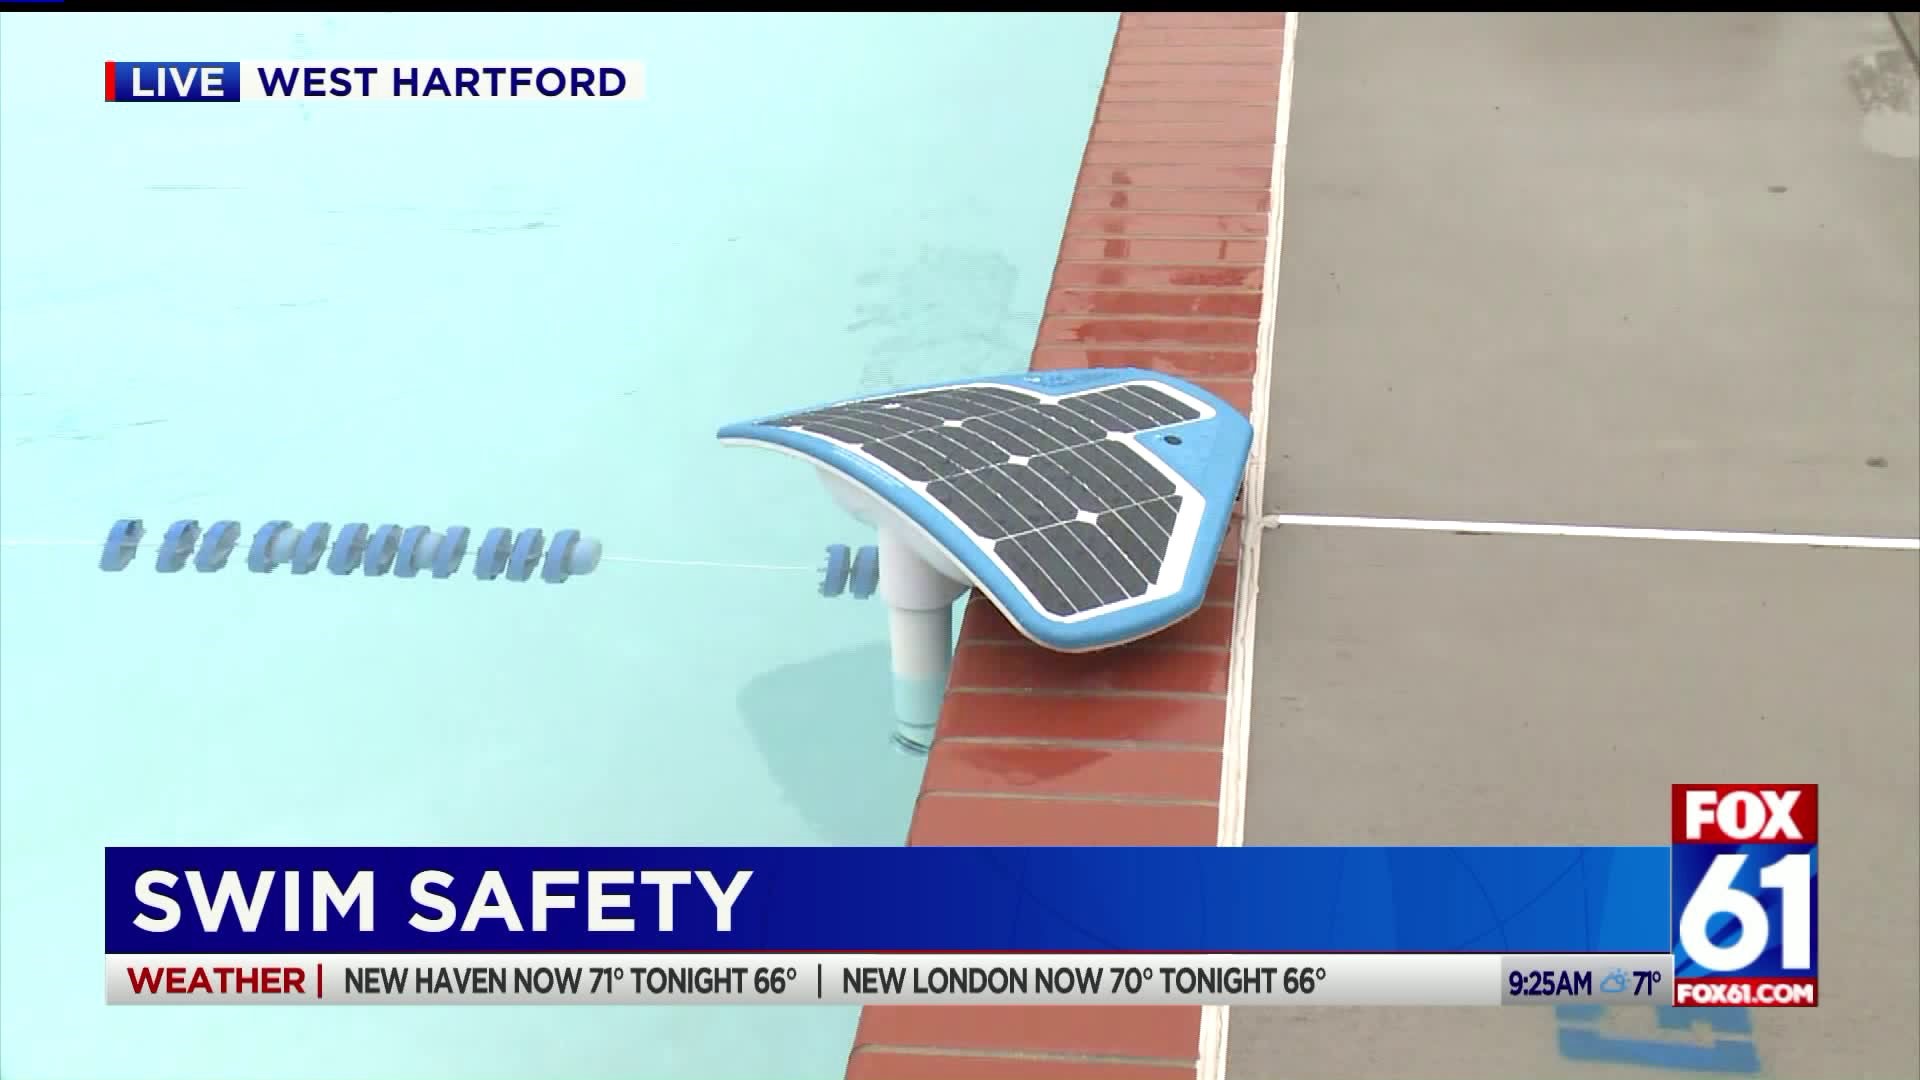 New tech for swimming safety